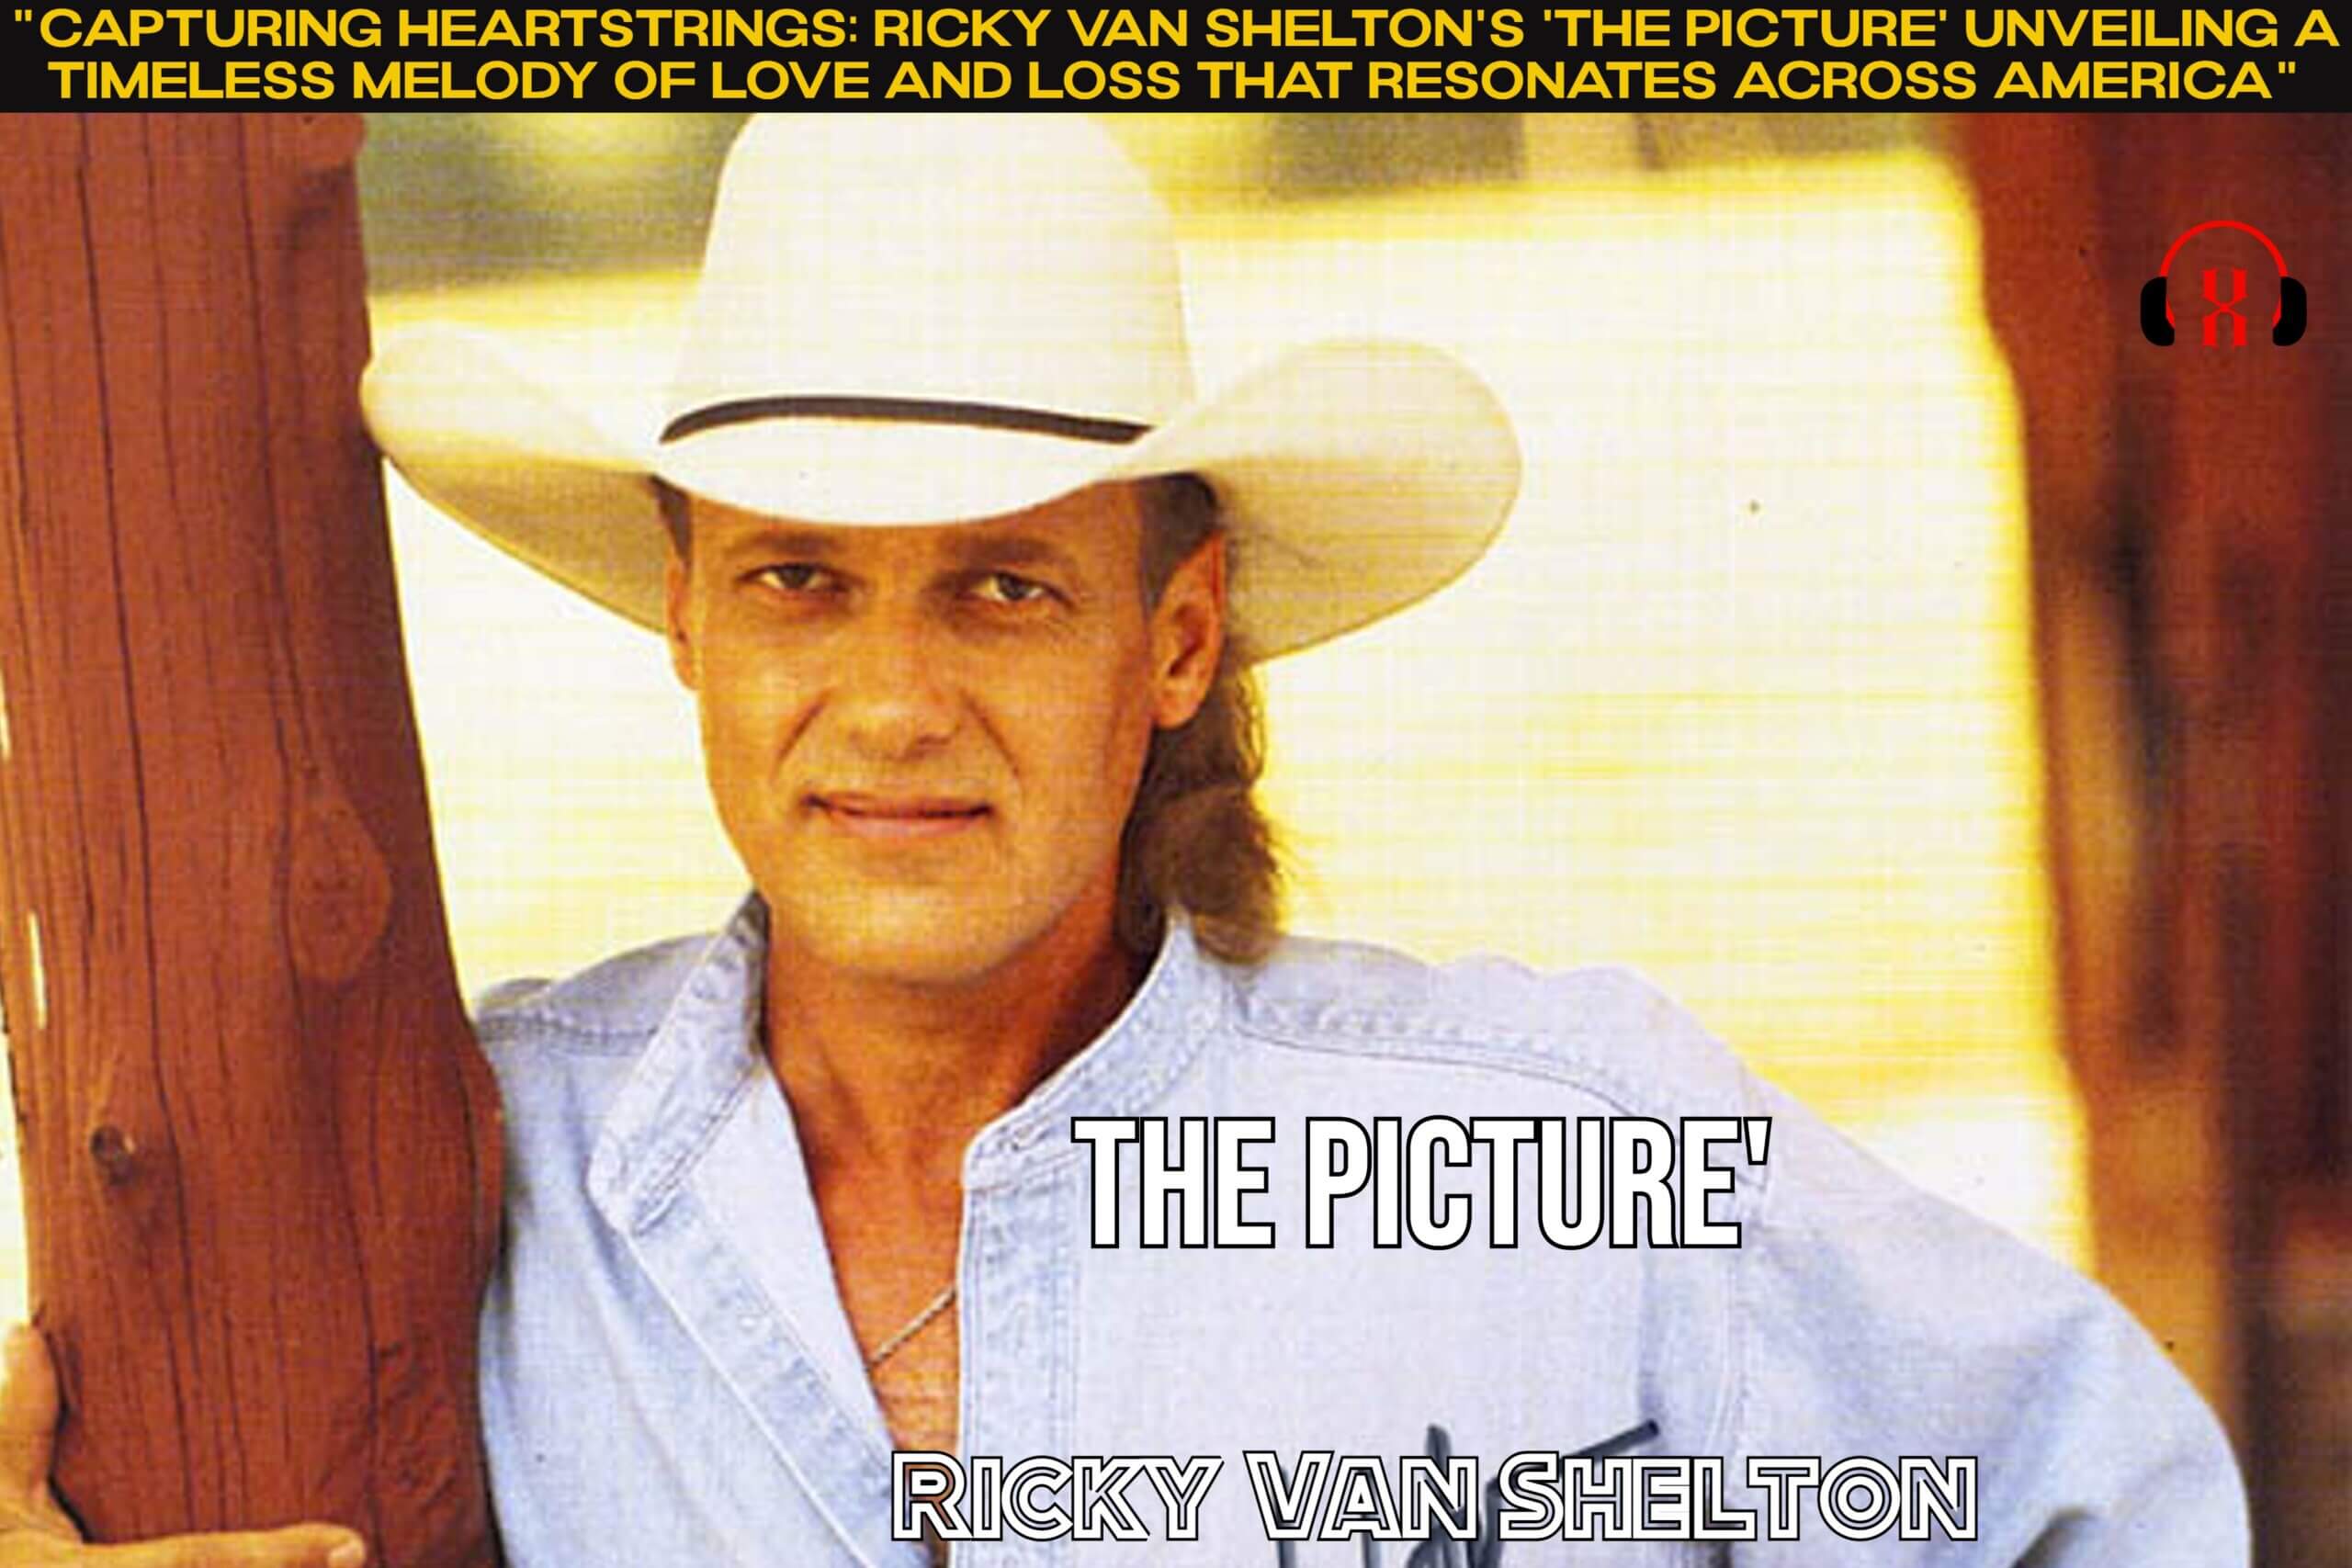 “Capturing Heartstrings: Ricky Van Shelton’s ‘The Picture’ Unveiling a Timeless Melody of Love and Loss That Resonates Across America”